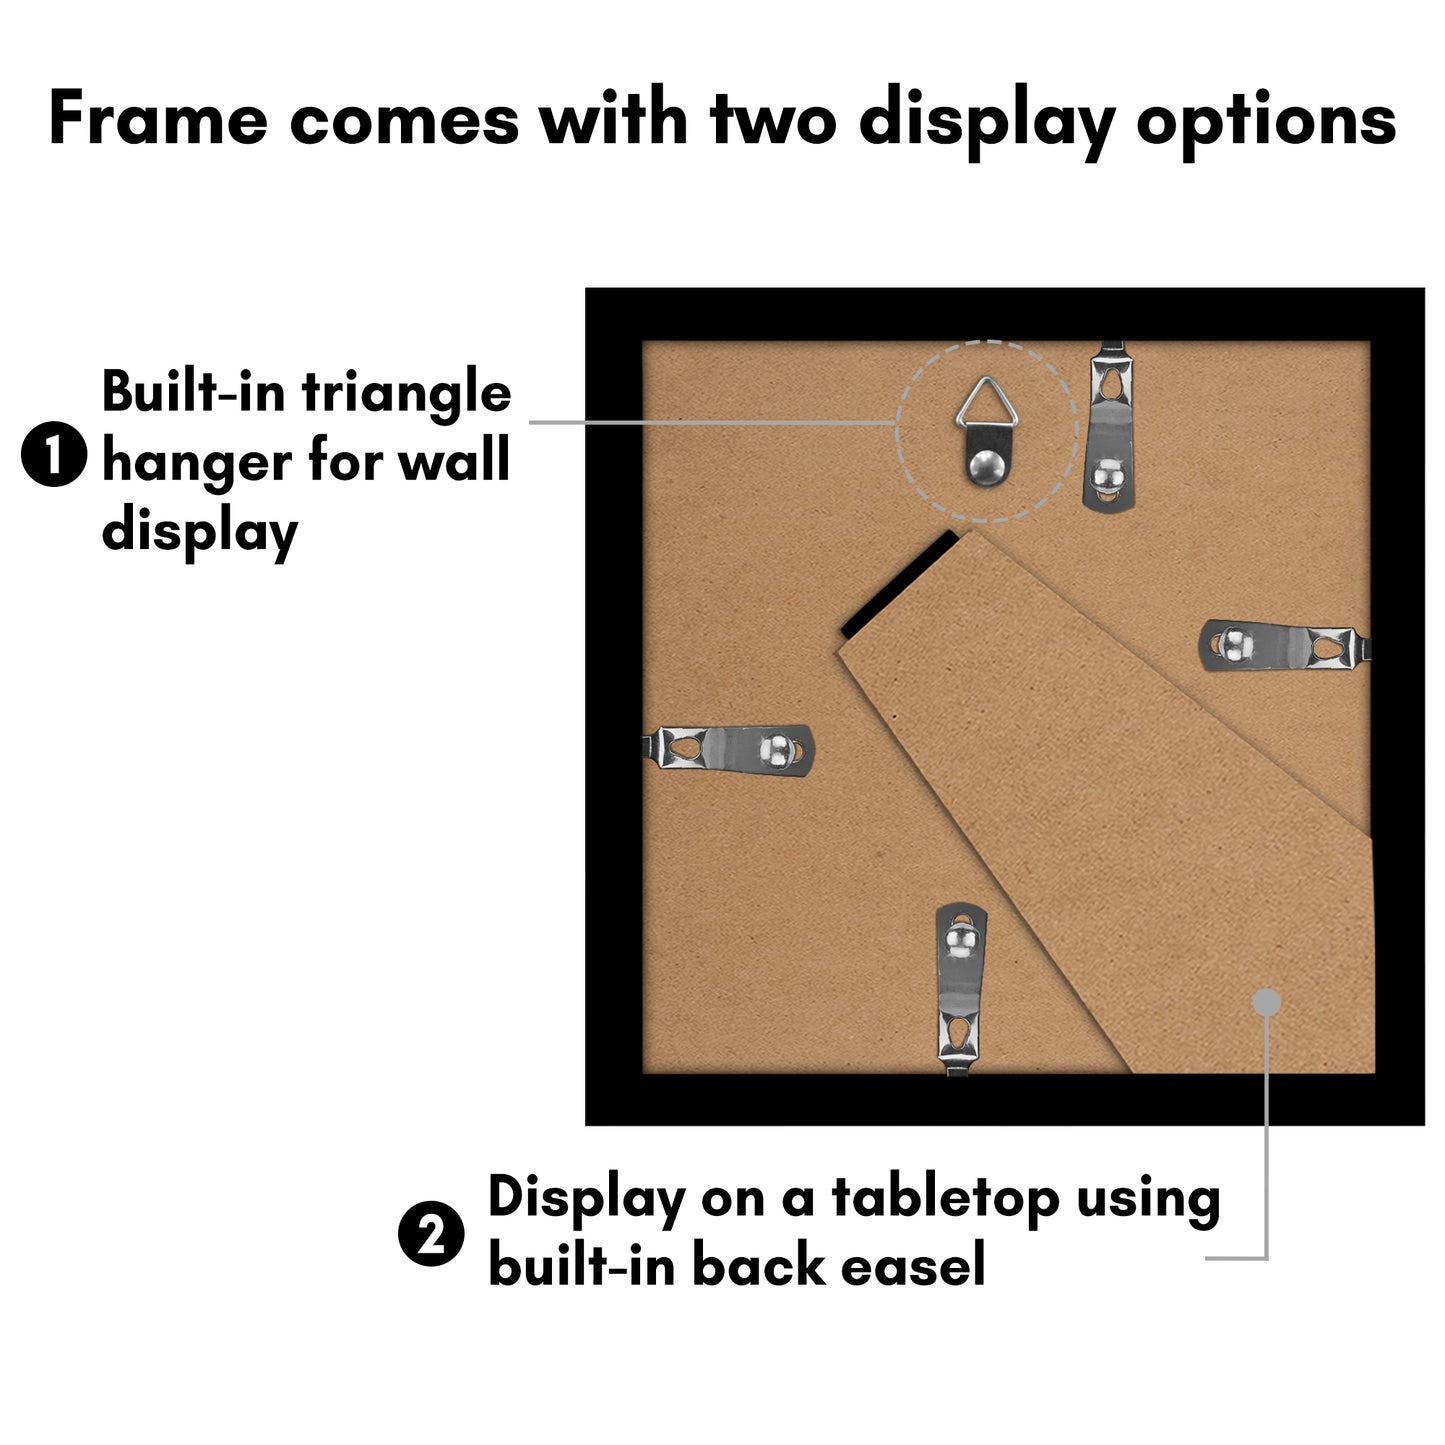 Picture Frame Set of 5 - Gallery Wall Frame Set with Included Hanging Hardware - Horizontal or Vertical Display